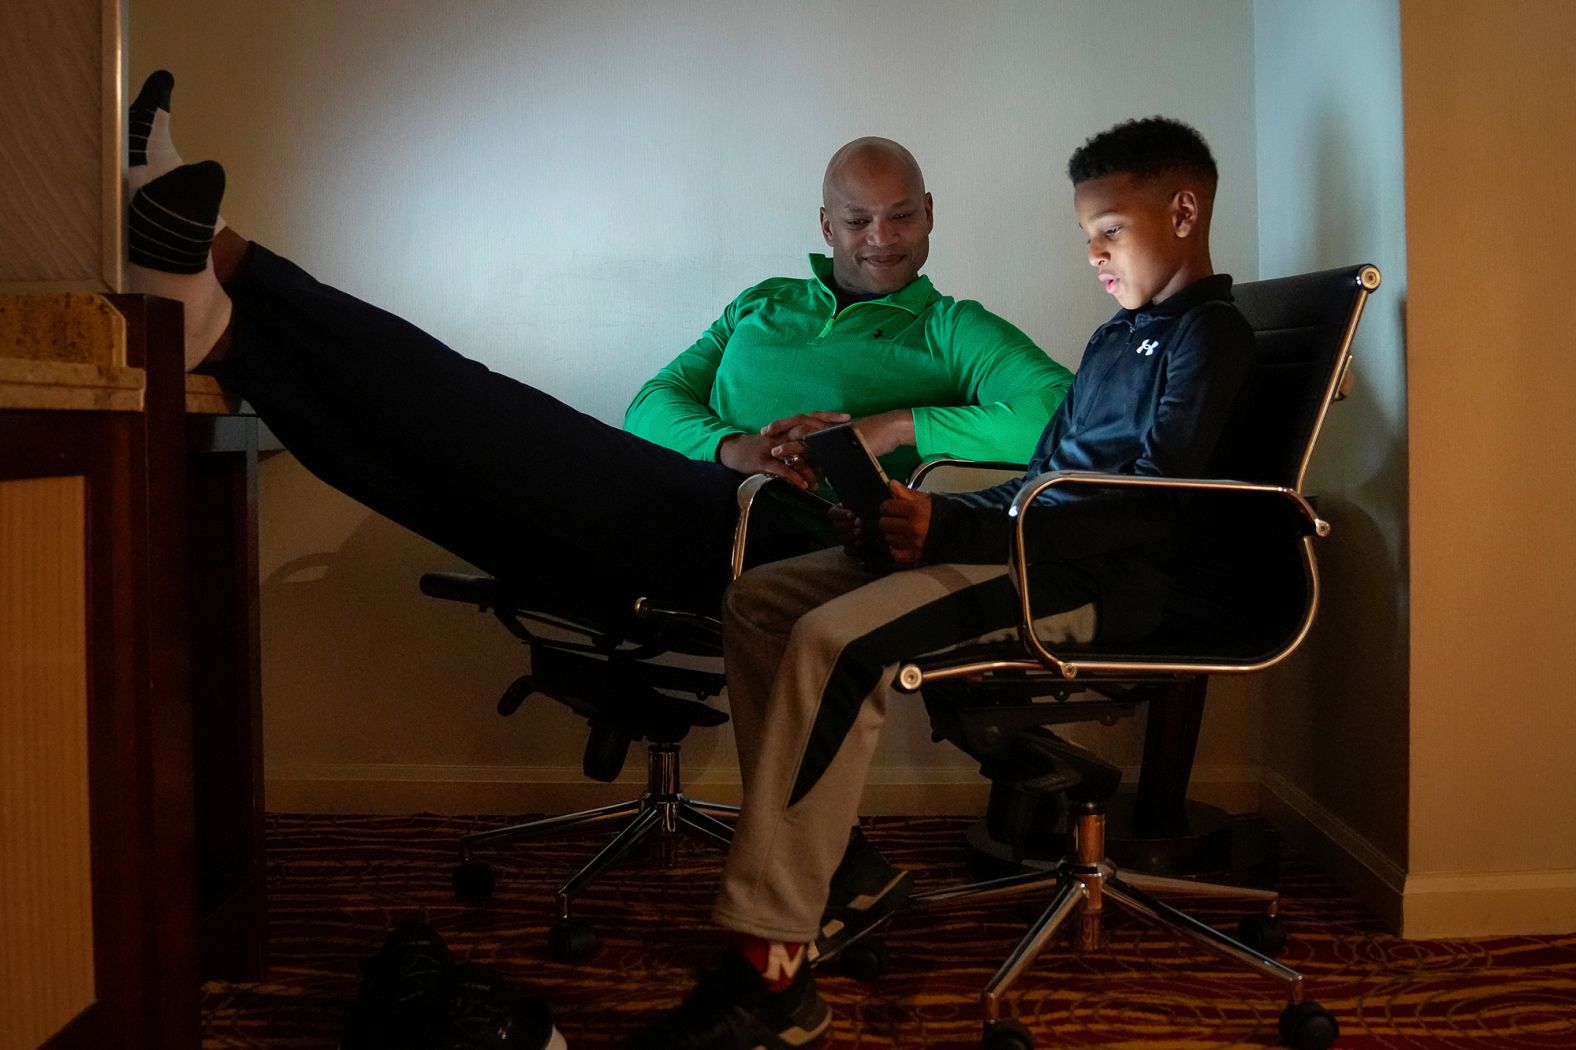 Wes Moore, the Democratic Party's gubernatorial candidate in Maryland, rehearses a speech with his son, Jamie, as they wait for Election Day results in Baltimore. <a href="index.php?page=&url=https%3A%2F%2Fwww.cnn.com%2Fpolitics%2Flive-news%2Fmidterm-election-results-livestream-voting-11-08-2022%2Fh_24257f4db41cc0202ad7f0c220552c07" target="_blank">CNN projected that Moore would be the winner</a> in his race against Dan Cox. That makes Moore the first Black governor in Maryland's history. It also makes him just the third Black American to be elected governor in US history, after Virginia's Douglas Wilder, who was elected to a term in 1989, and Massachusetts' Deval Patrick, who was first elected in 2006 and served two terms.